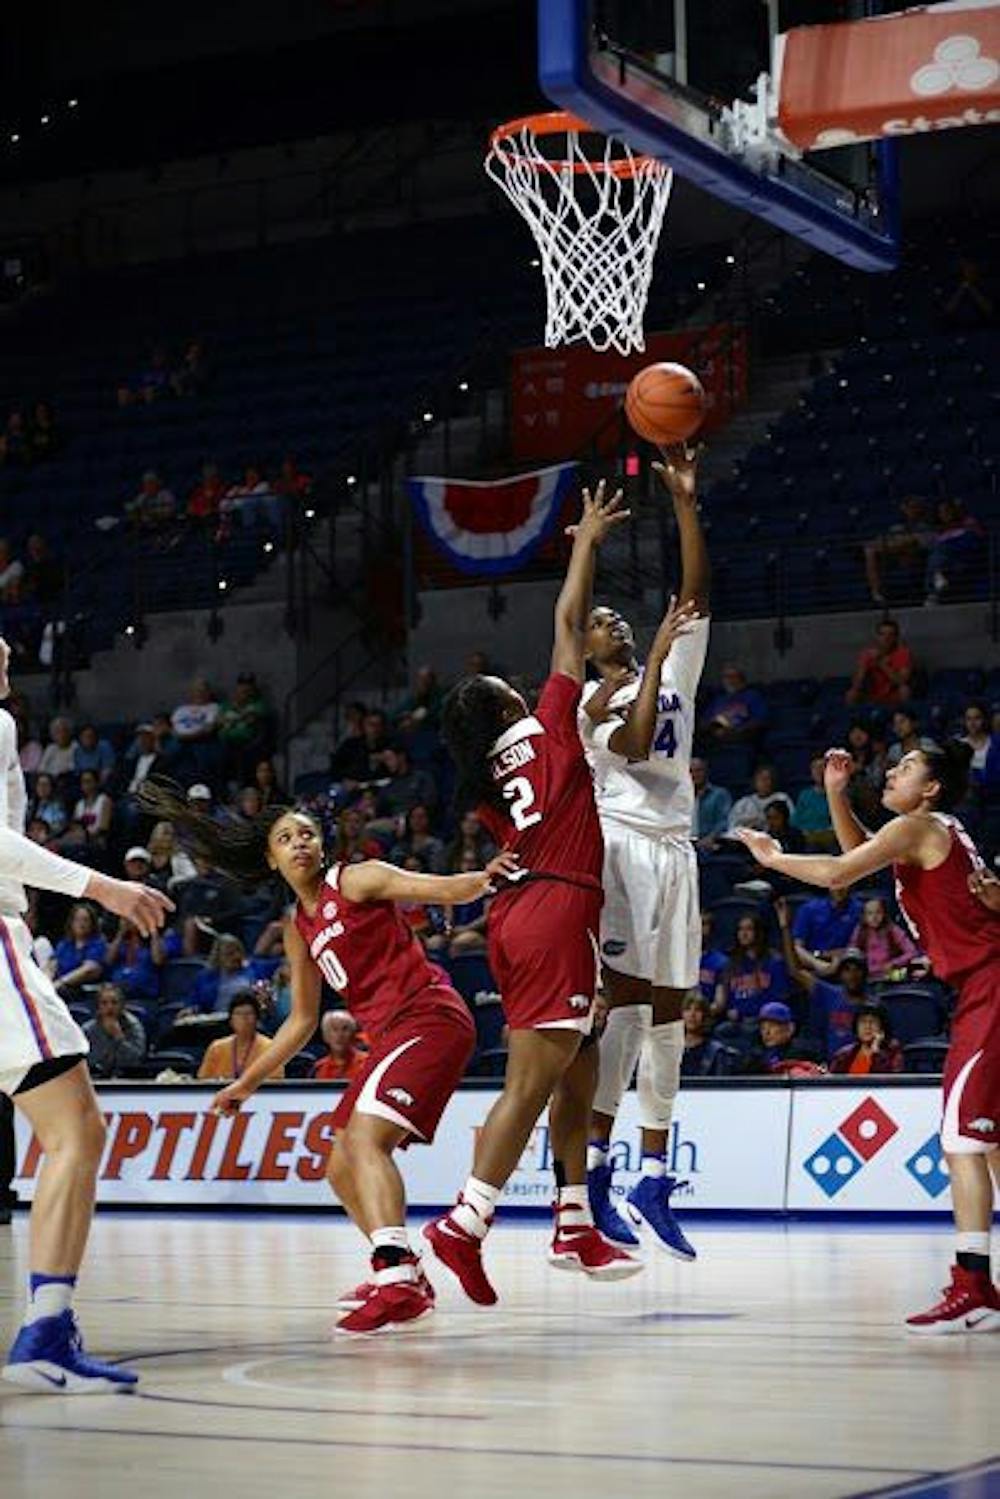 <p>UF center Tyshara Fleming attempts a lay-up during Florida's 57-53 win against Arkansas on Feb. 9, 2017, in the O'Connell Center.&nbsp;</p>